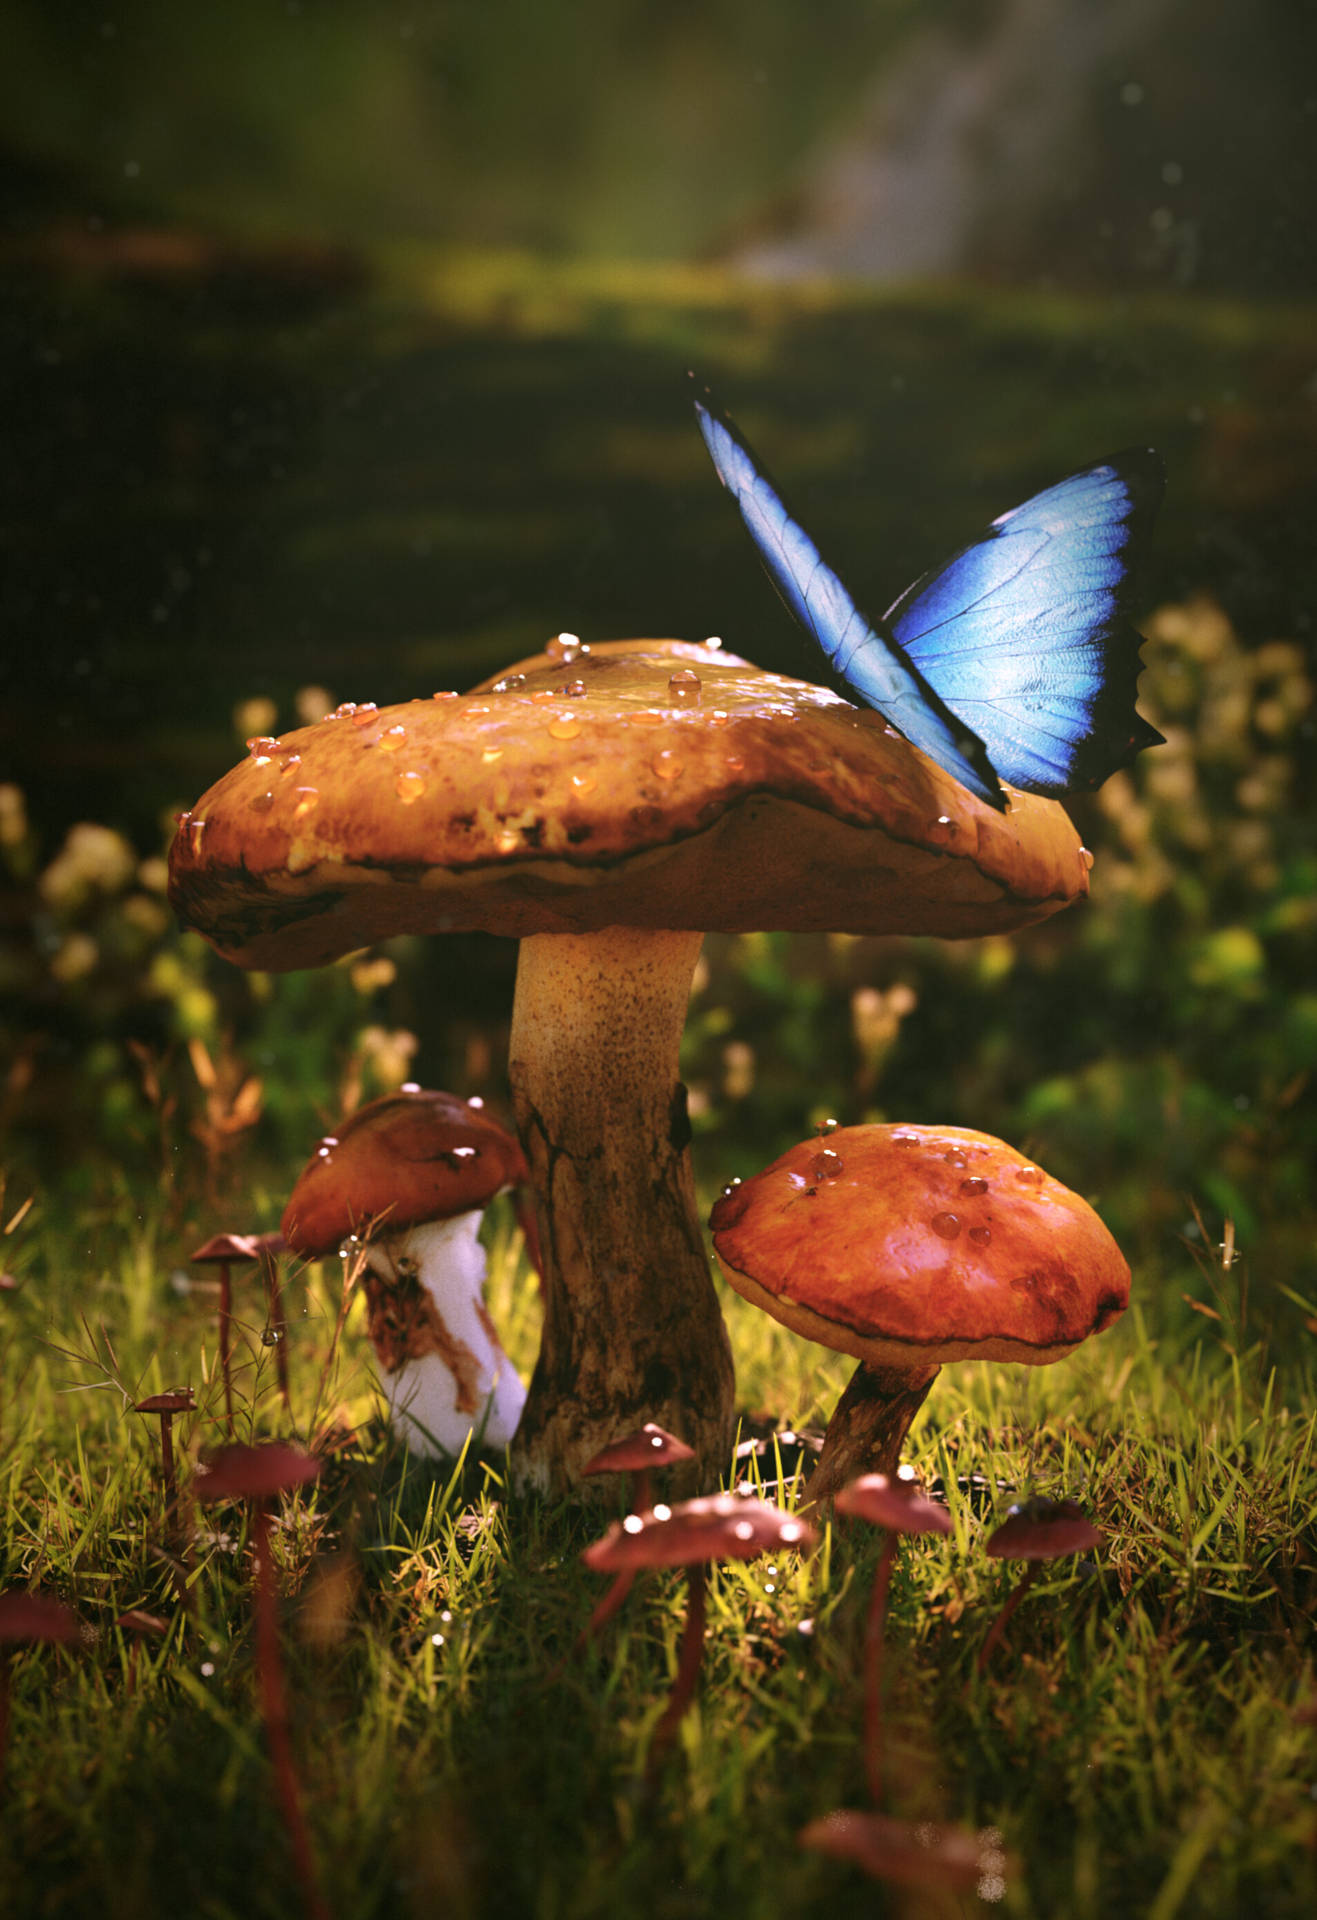 Friendship Between A Mushroom And Butterfly